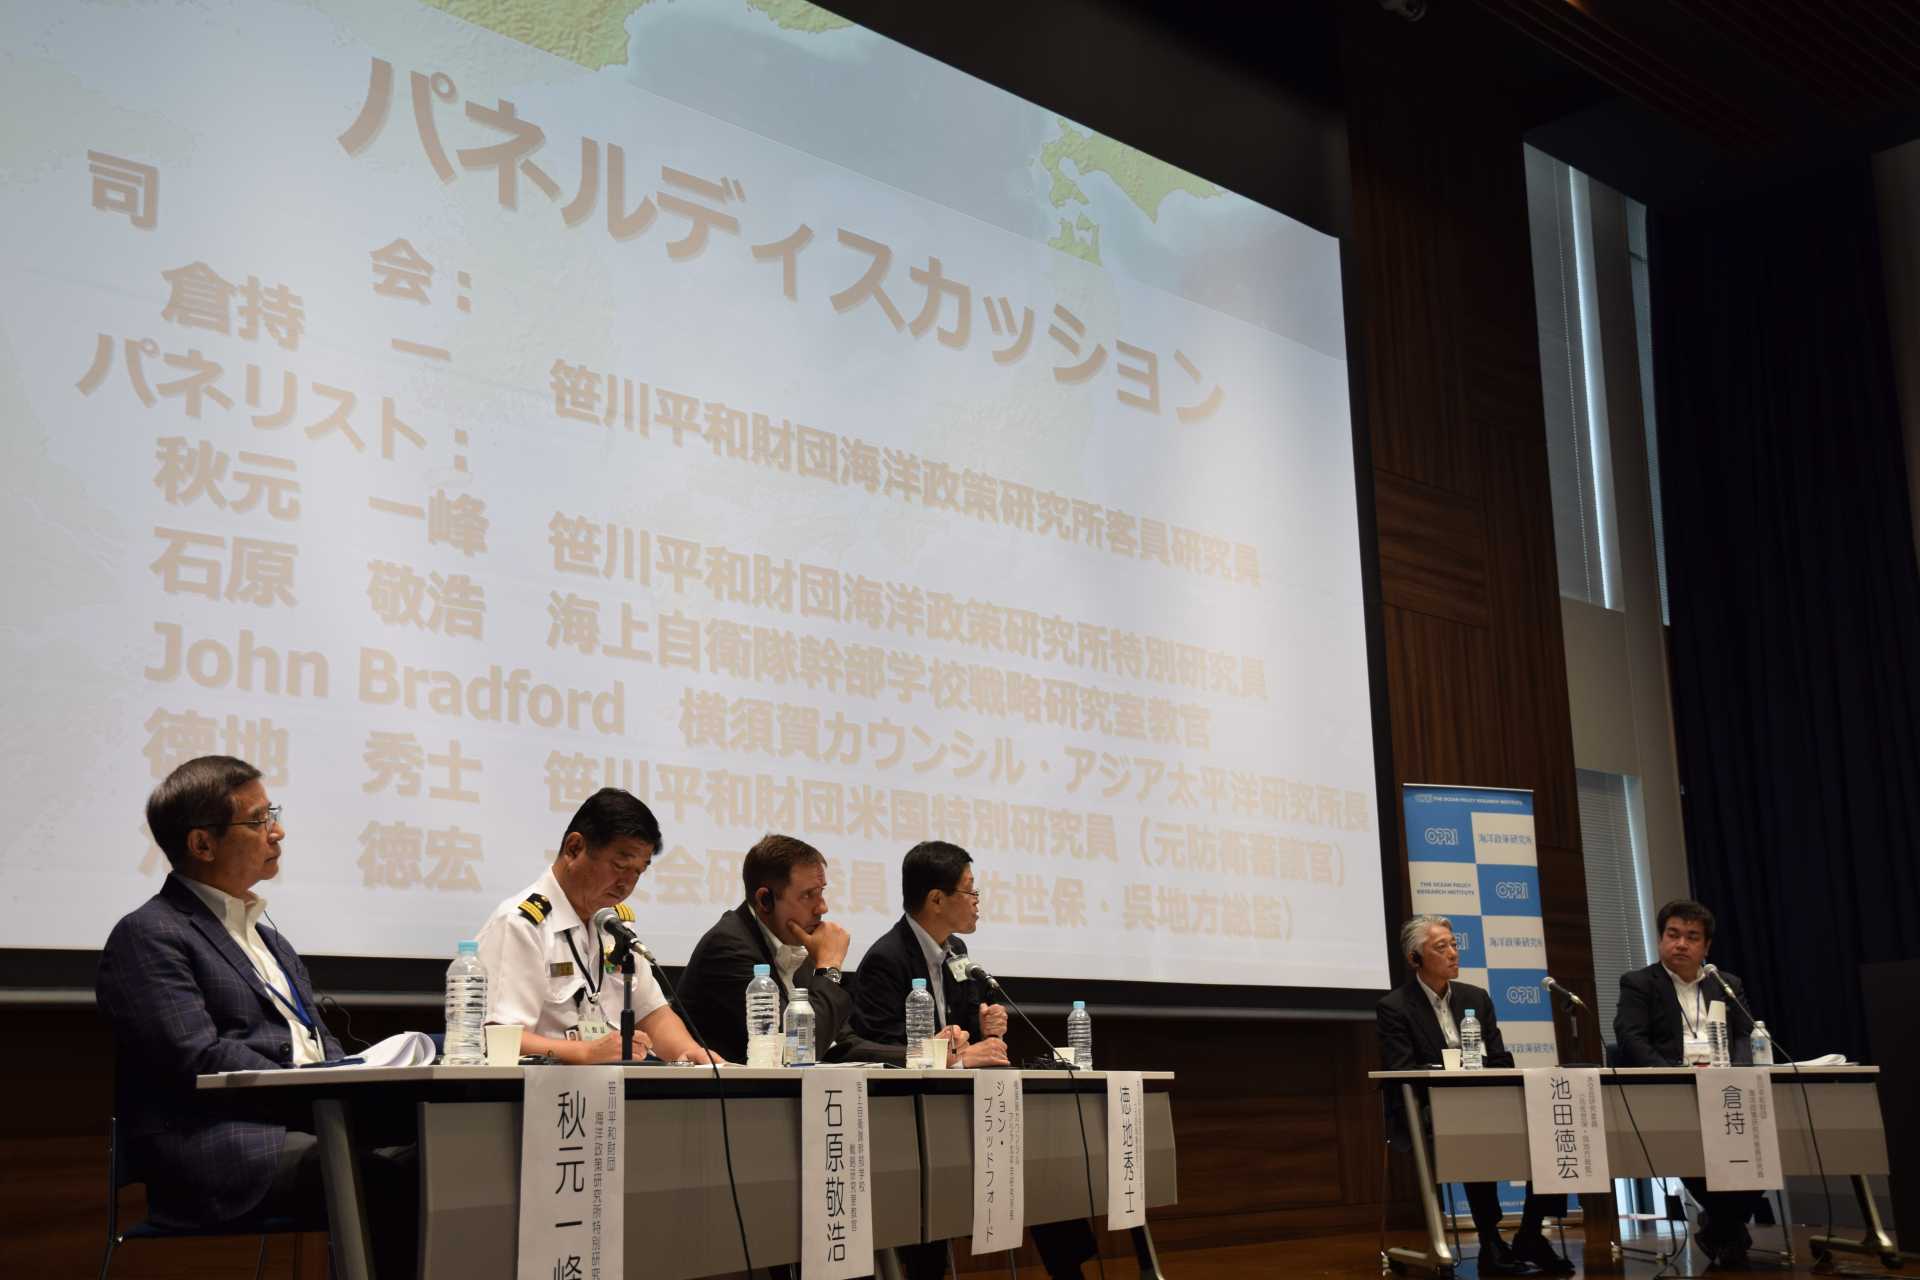 The Symposium saw meaningful discussions on topics including the utilization of the amphibious forces of the Japan Self-defense Forces (JSDF) and the Free and Open Indo-Pacific Strategy.